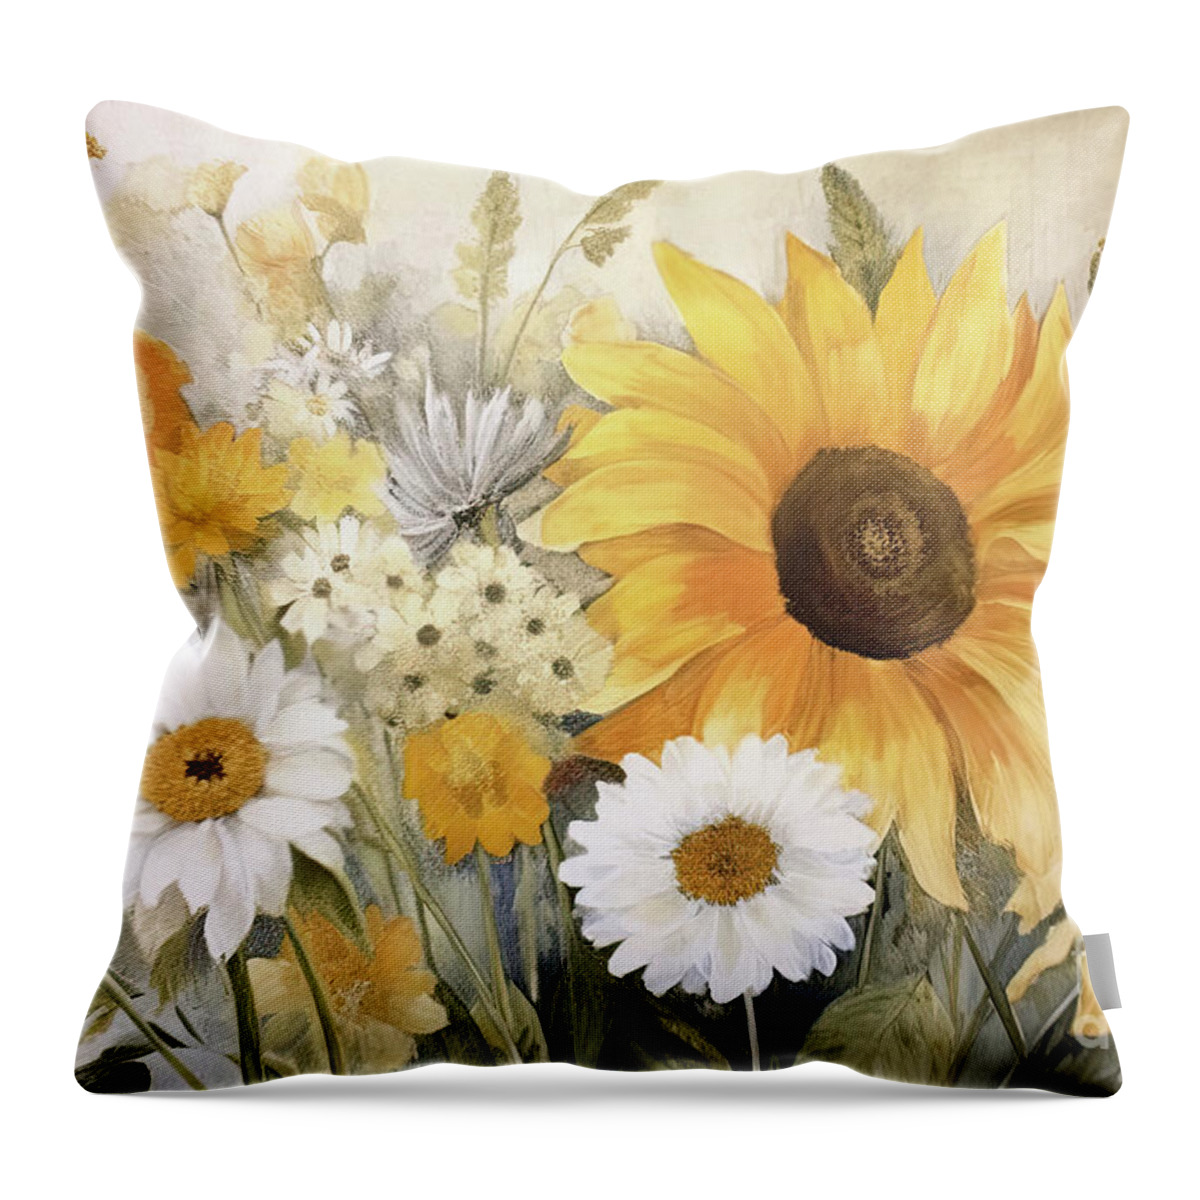 Sunflower Throw Pillow featuring the painting Sunflower Botanicals by Tina LeCour